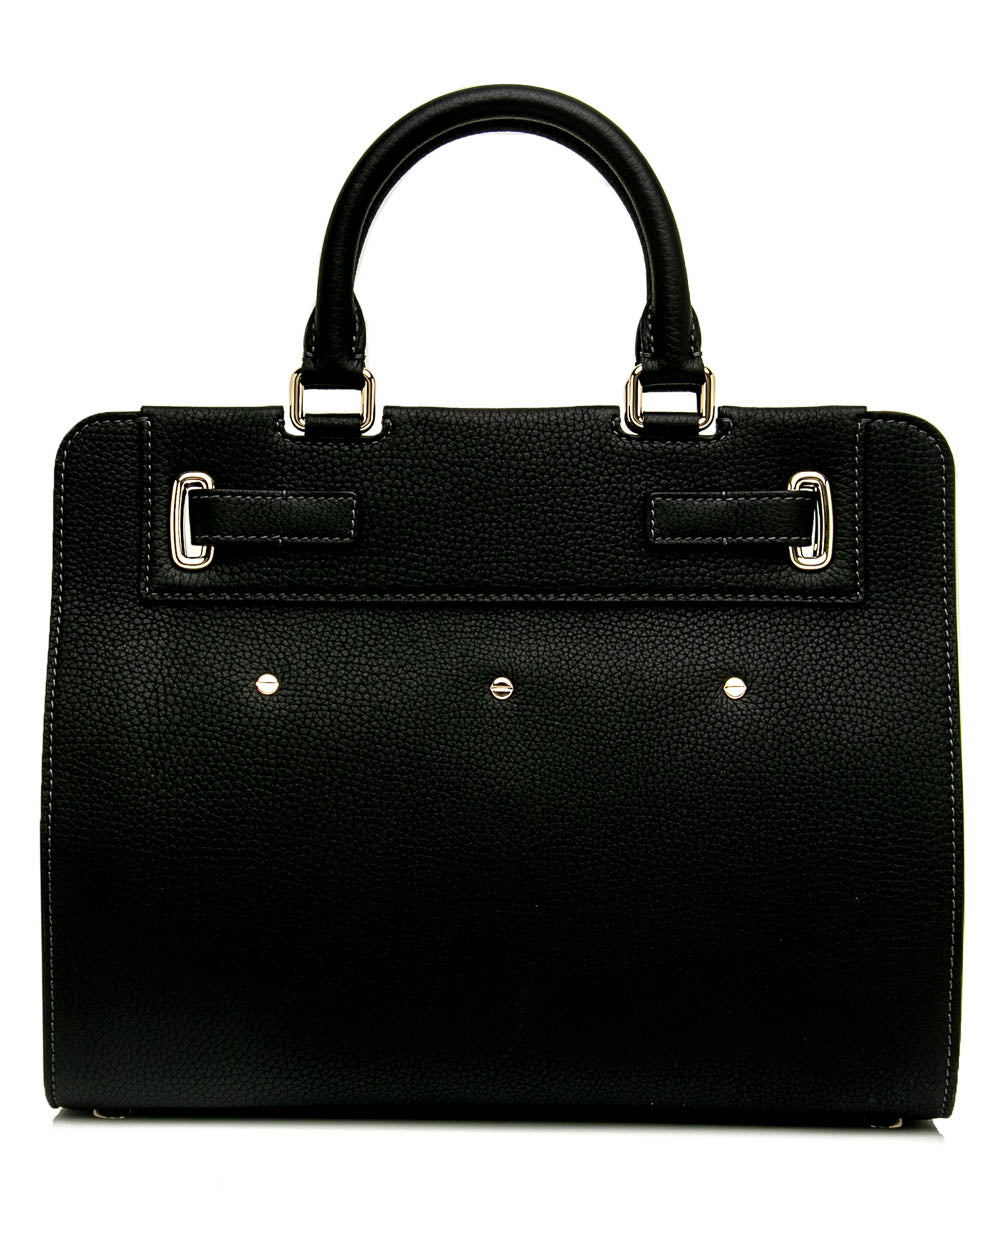 A Lady Bag in Black With Gold Tone